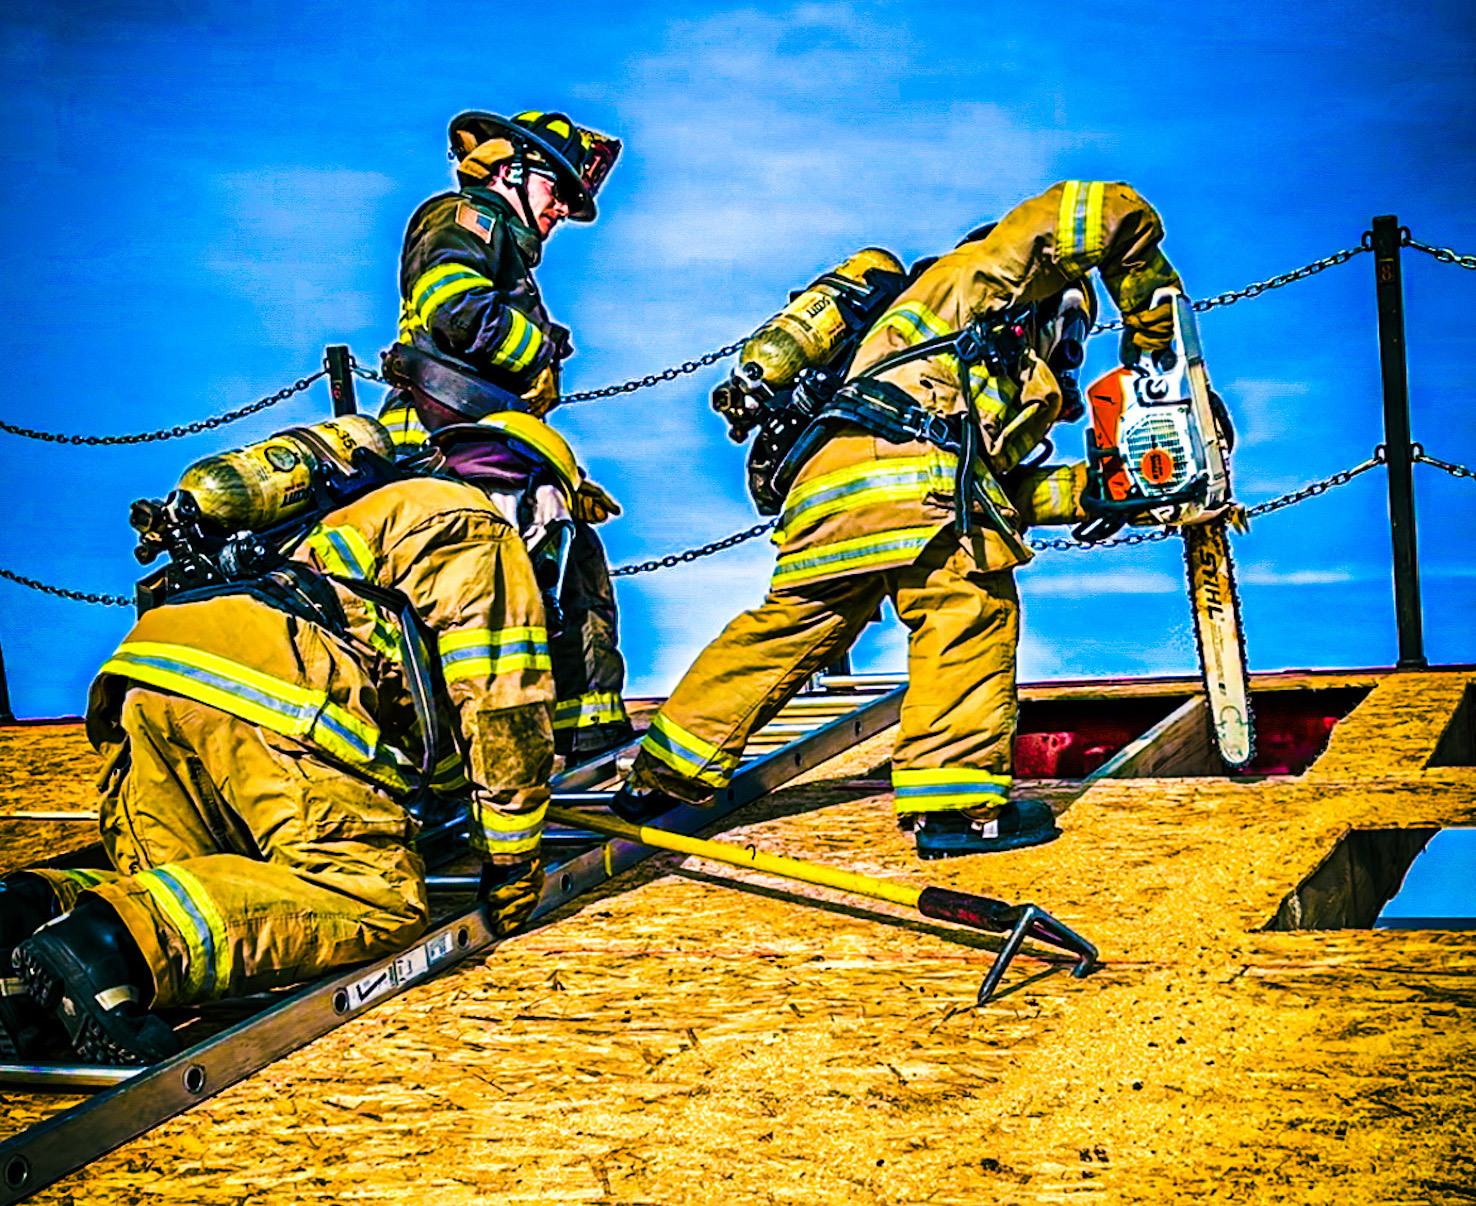 Fire Academy cadets in training